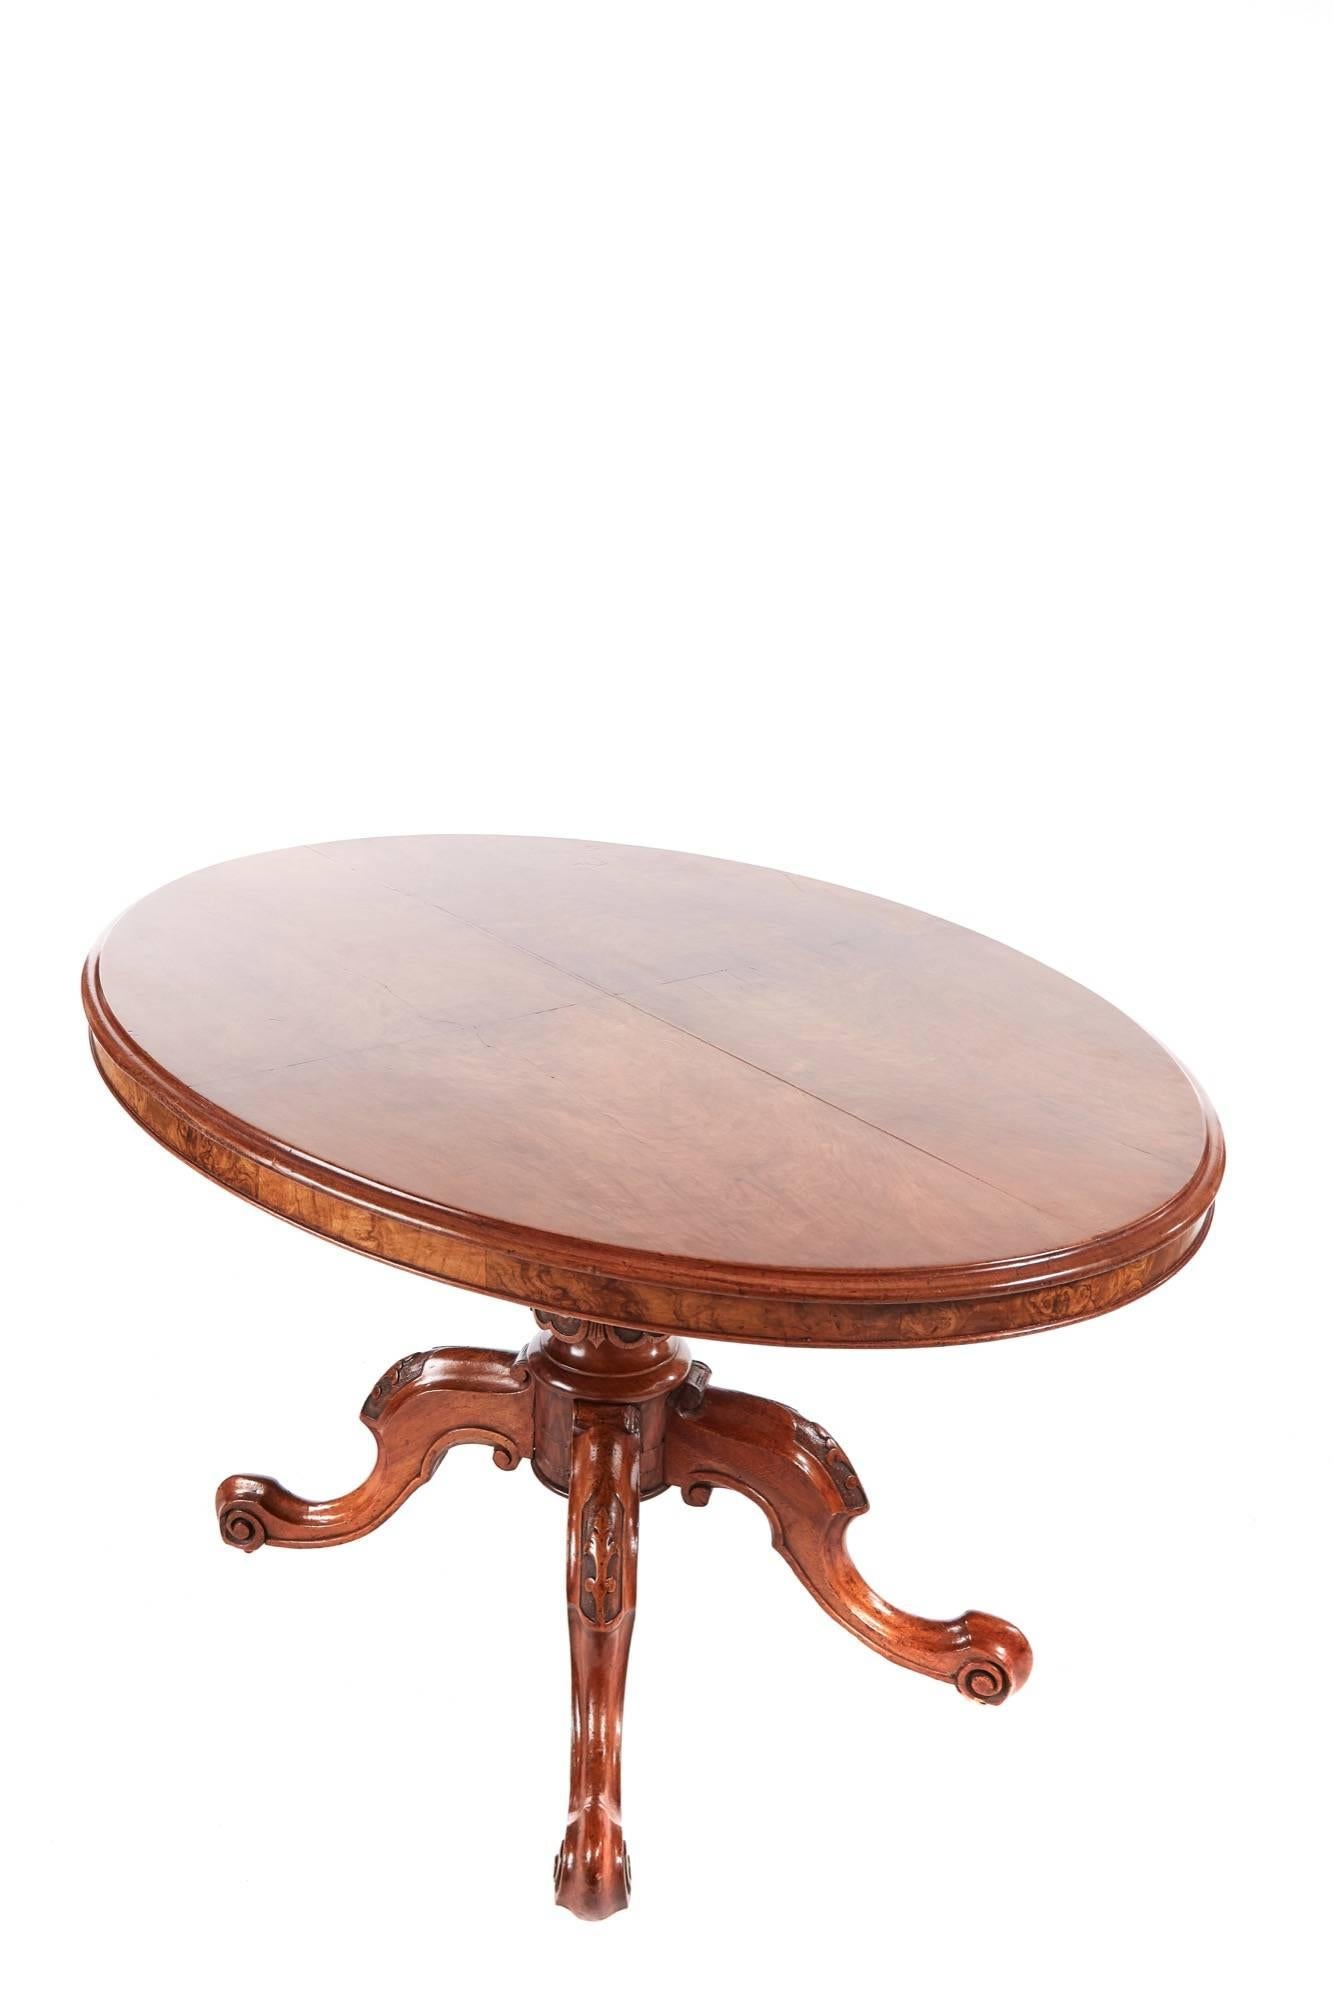 Victorian oval walnut centre table, the walnut top with a thumb moulded egde, the base having a carved centre column supported on four carved cabriole legs with original castors.
Nice color and condition.